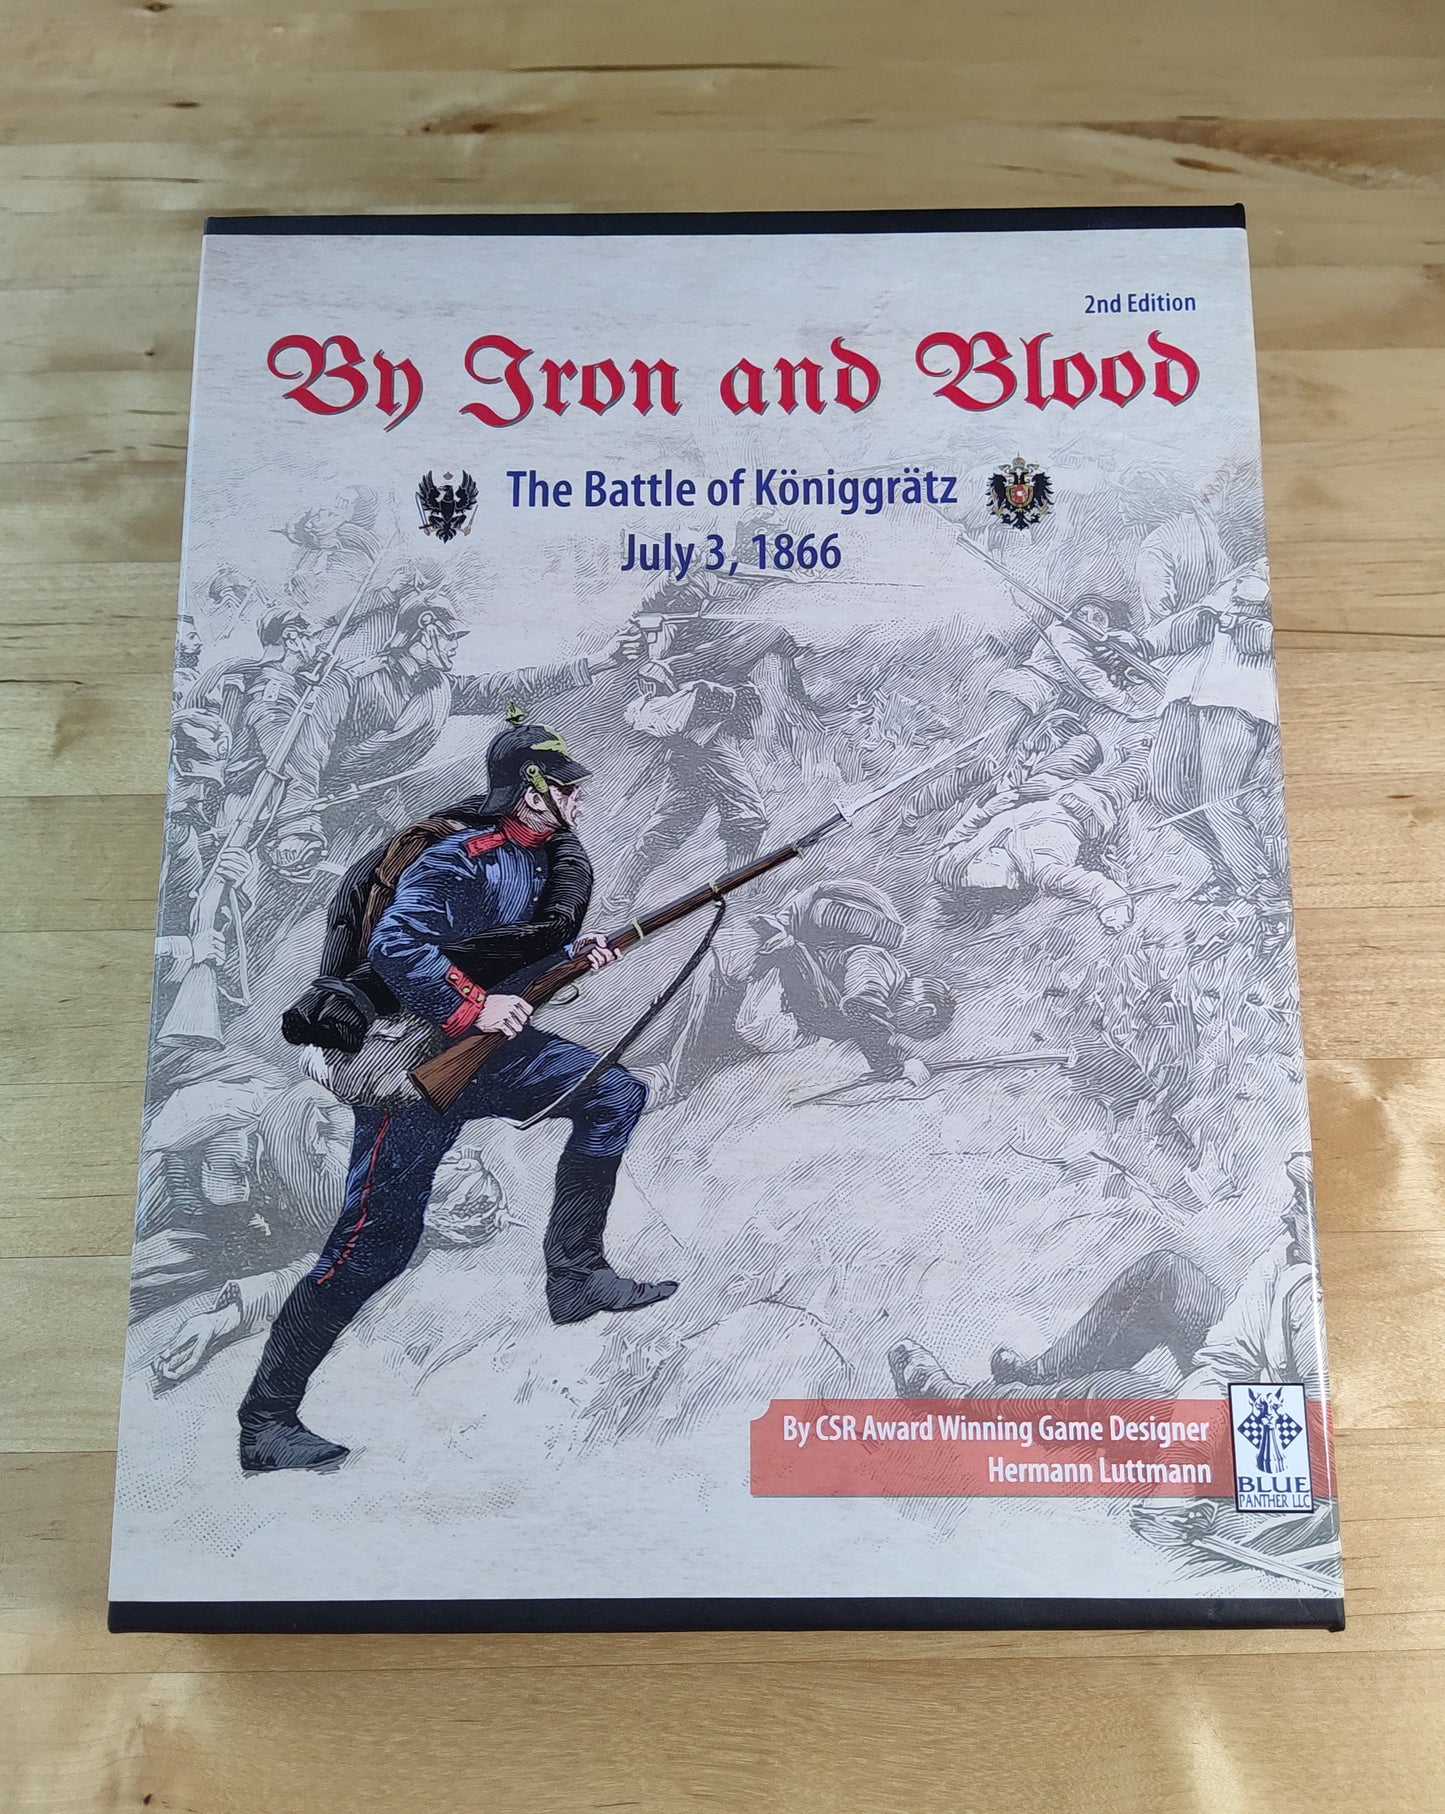 By Iron and Blood: 2nd Edition